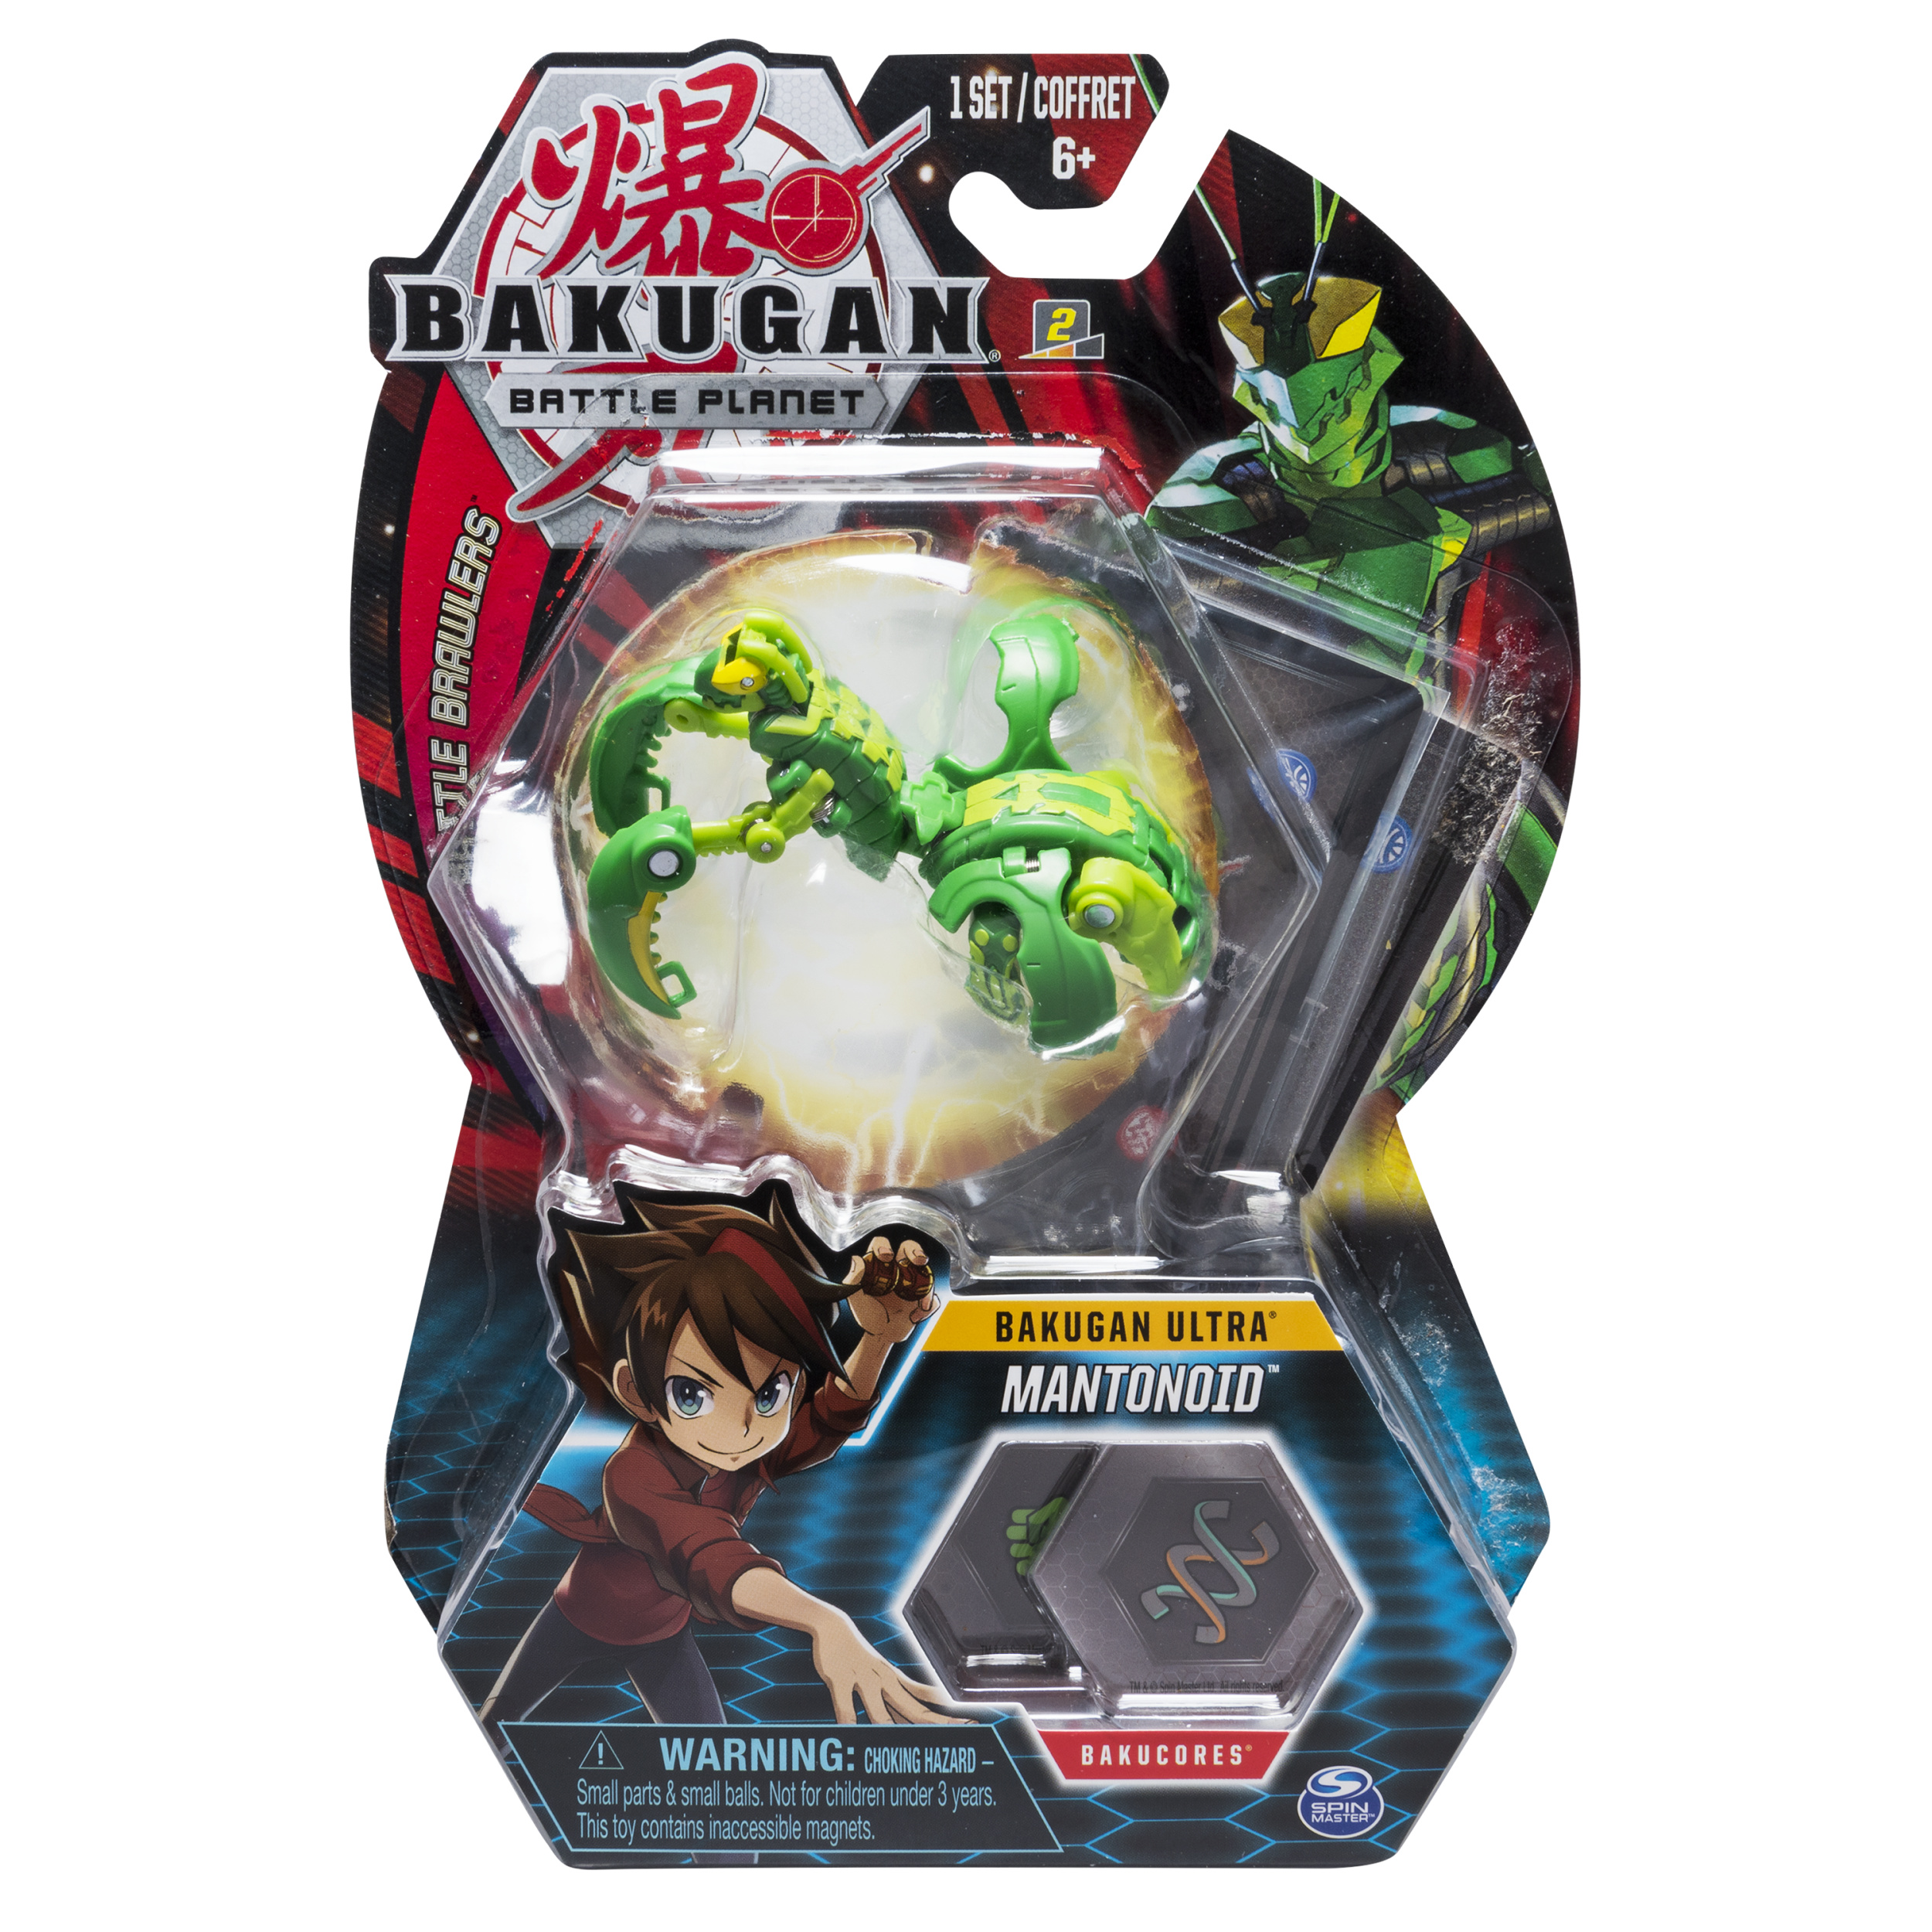 Bakugan Ultra, Mantonoid, 3-inch Collectible Action Figure and Trading Card, for Ages 6 and up - image 1 of 5